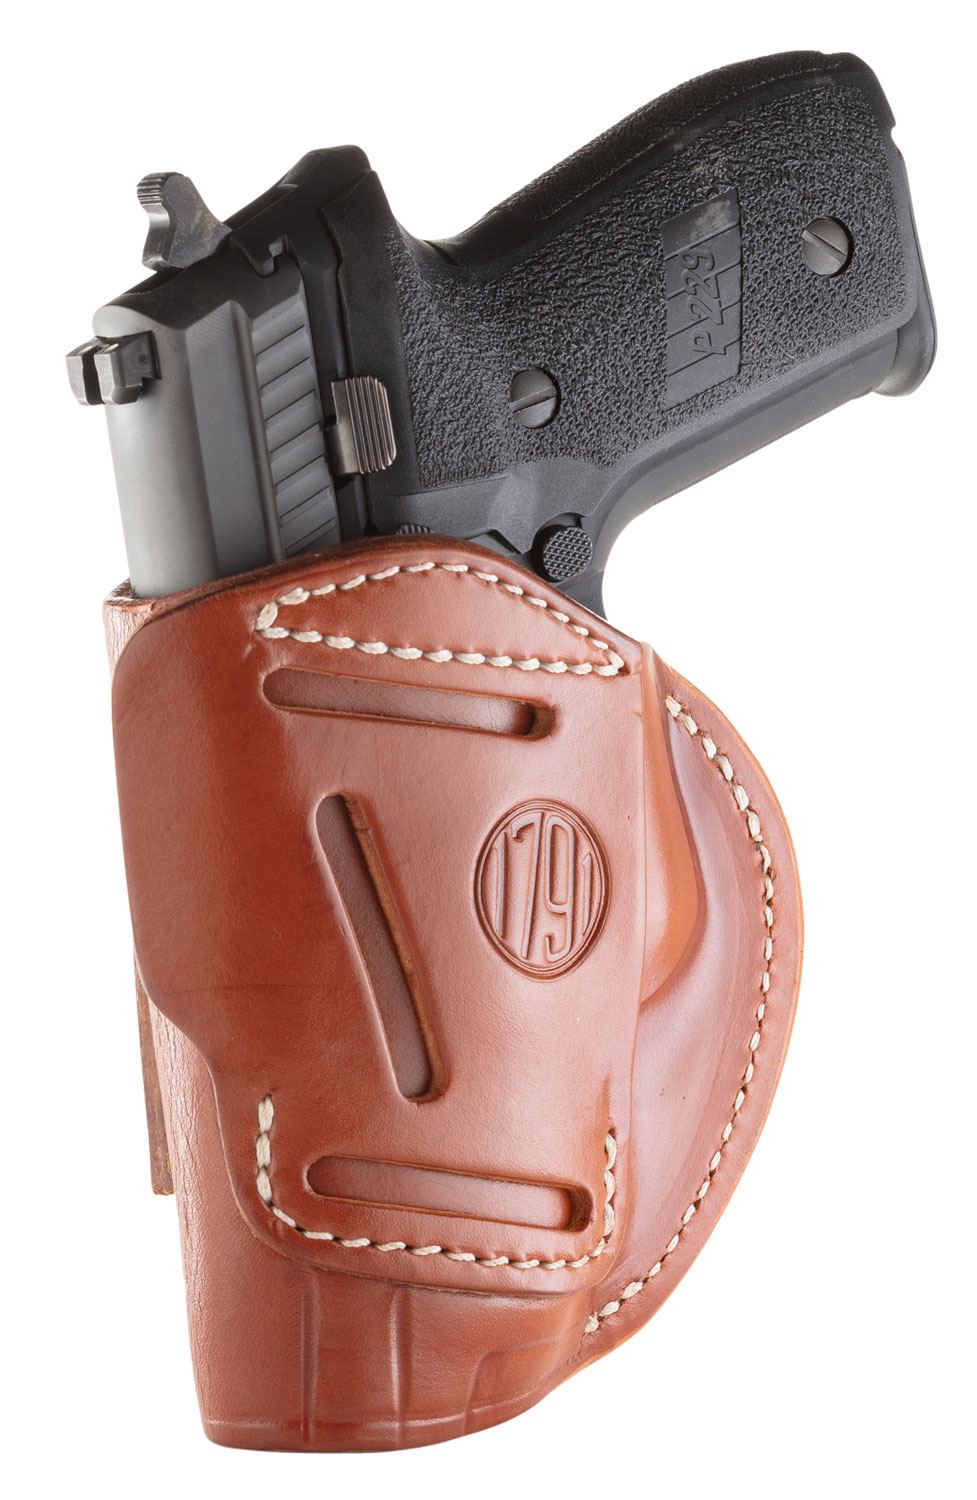 1791 Gunleather 4WH5CBRR 4-Way  IWB/OWB 05 Classic Brown Leather Belt Clip Fits S&W M&P/Springfield XD/Glock 17/HK VP9